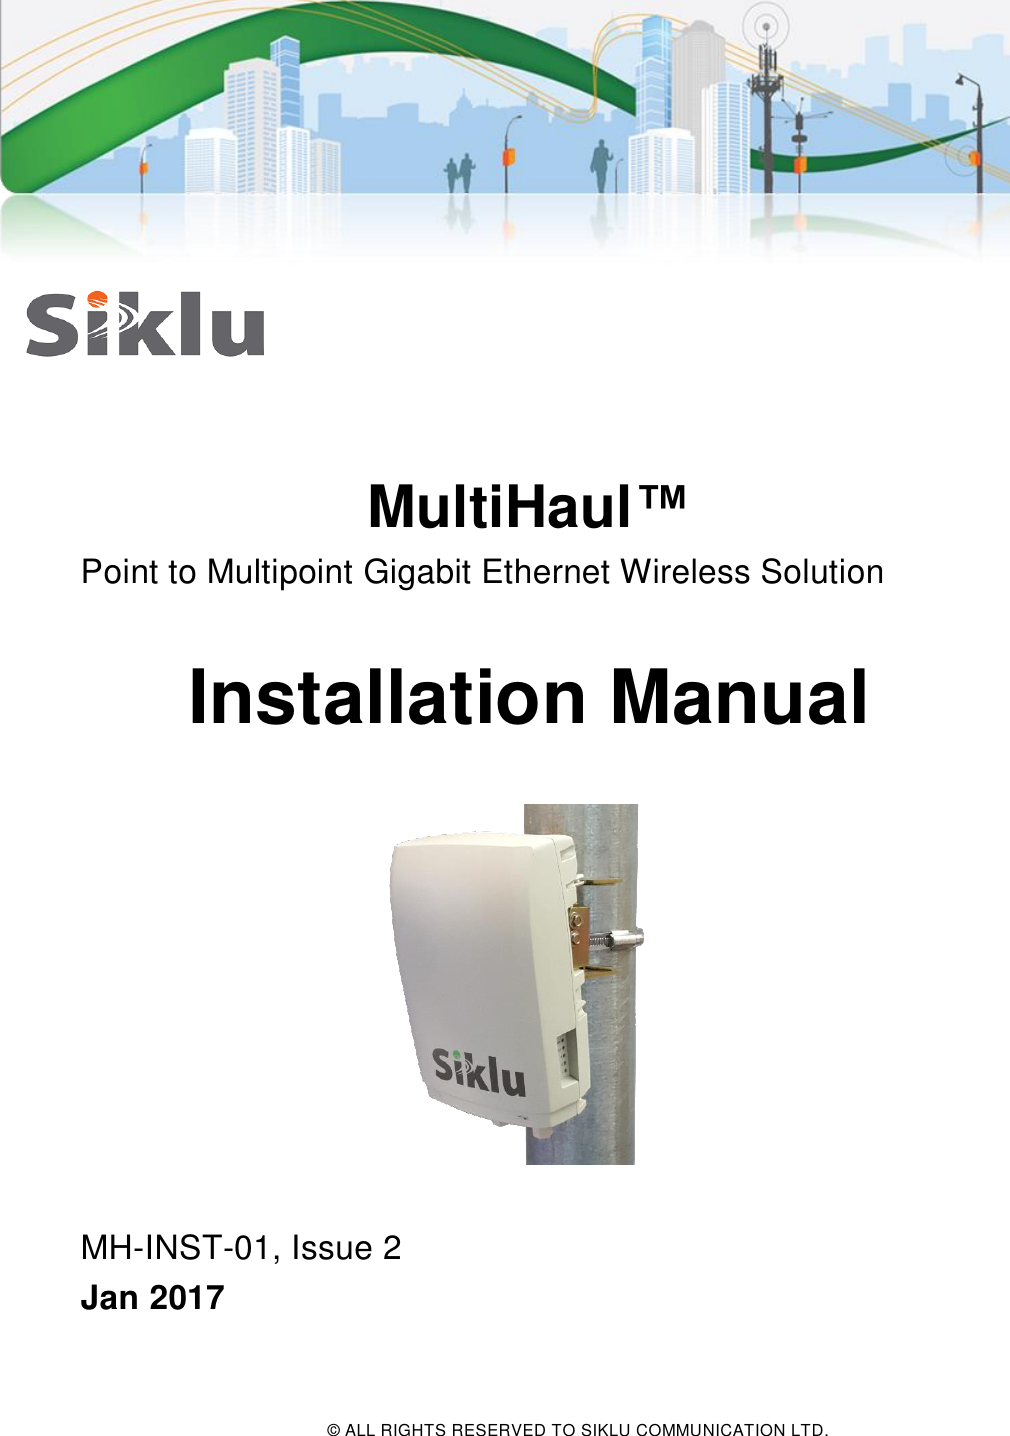  © ALL RIGHTS RESERVED TO SIKLU COMMUNICATION LTD.      MultiHaul™ Point to Multipoint Gigabit Ethernet Wireless Solution  Installation Manual    MH-INST-01, Issue 2 Jan 2017  